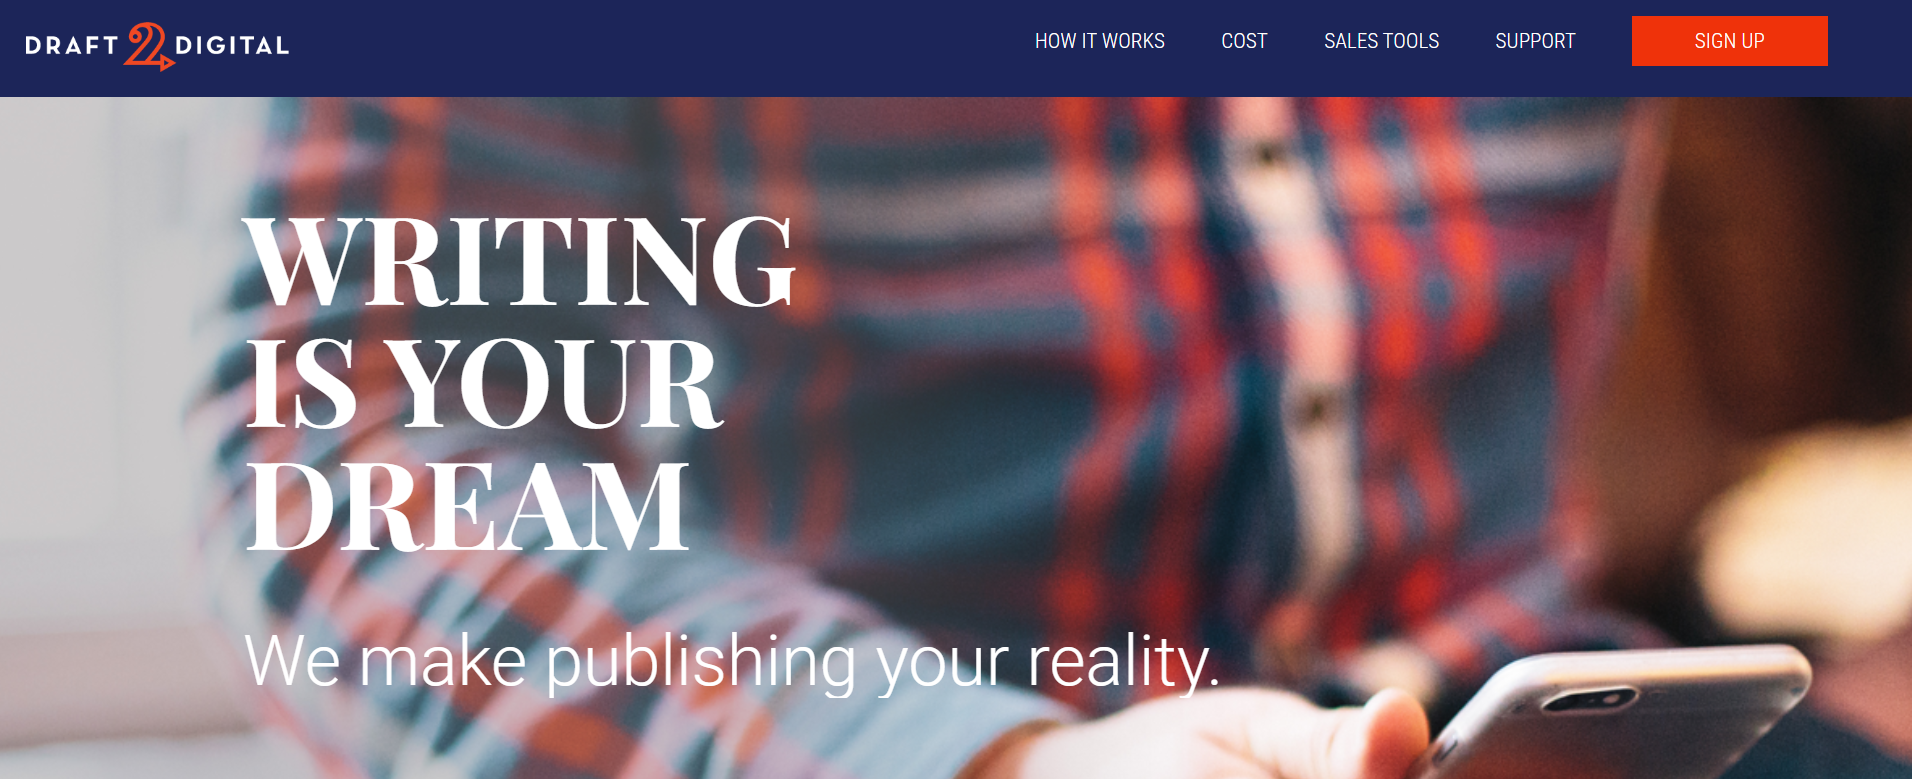 how to publish a book for free on Draft2Digital